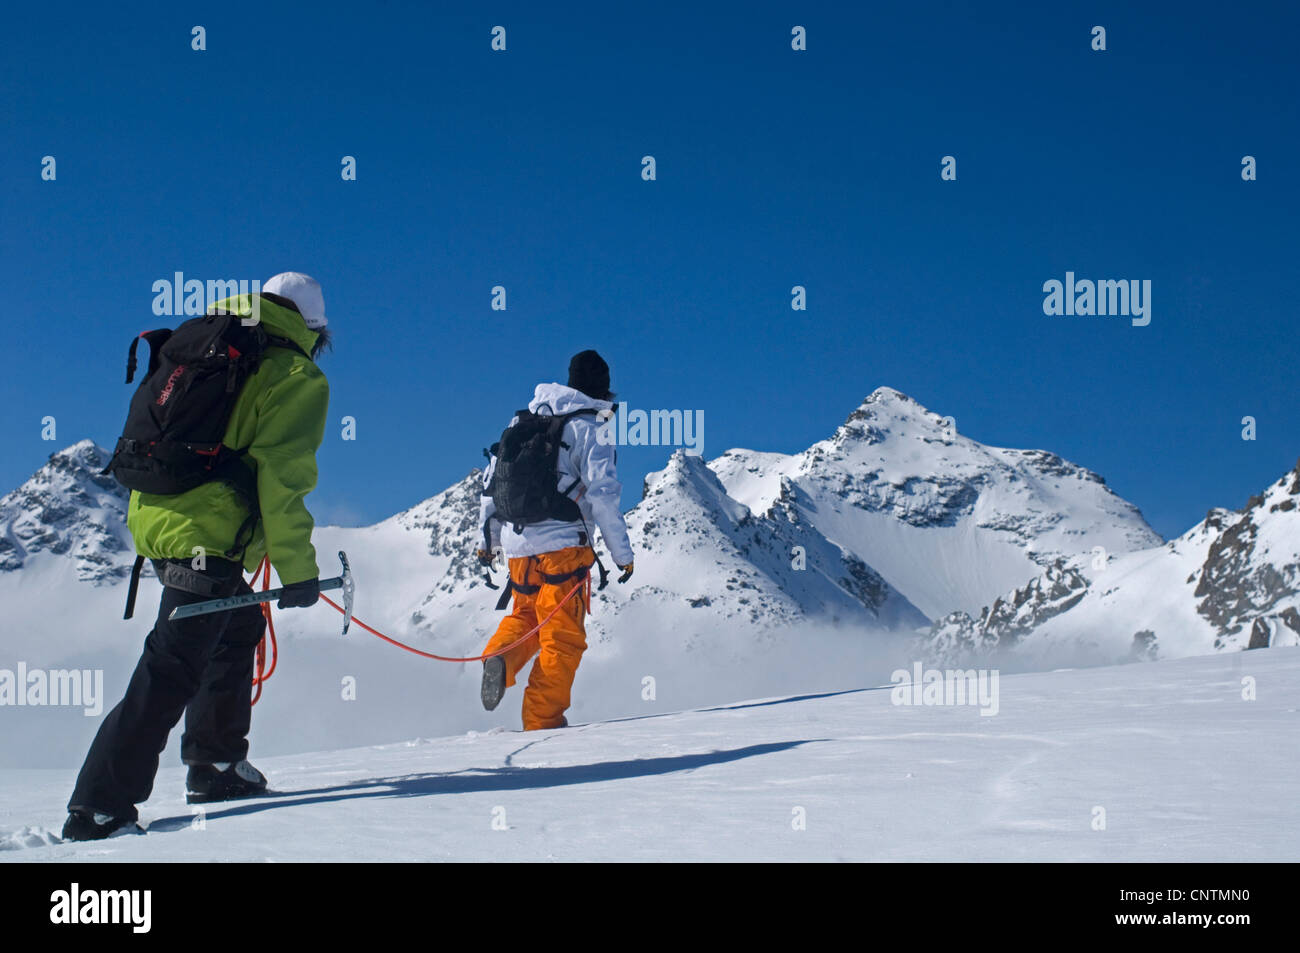 alpinism in the snow capped mountains of the Vanoise National Park, France, Savoie Stock Photo